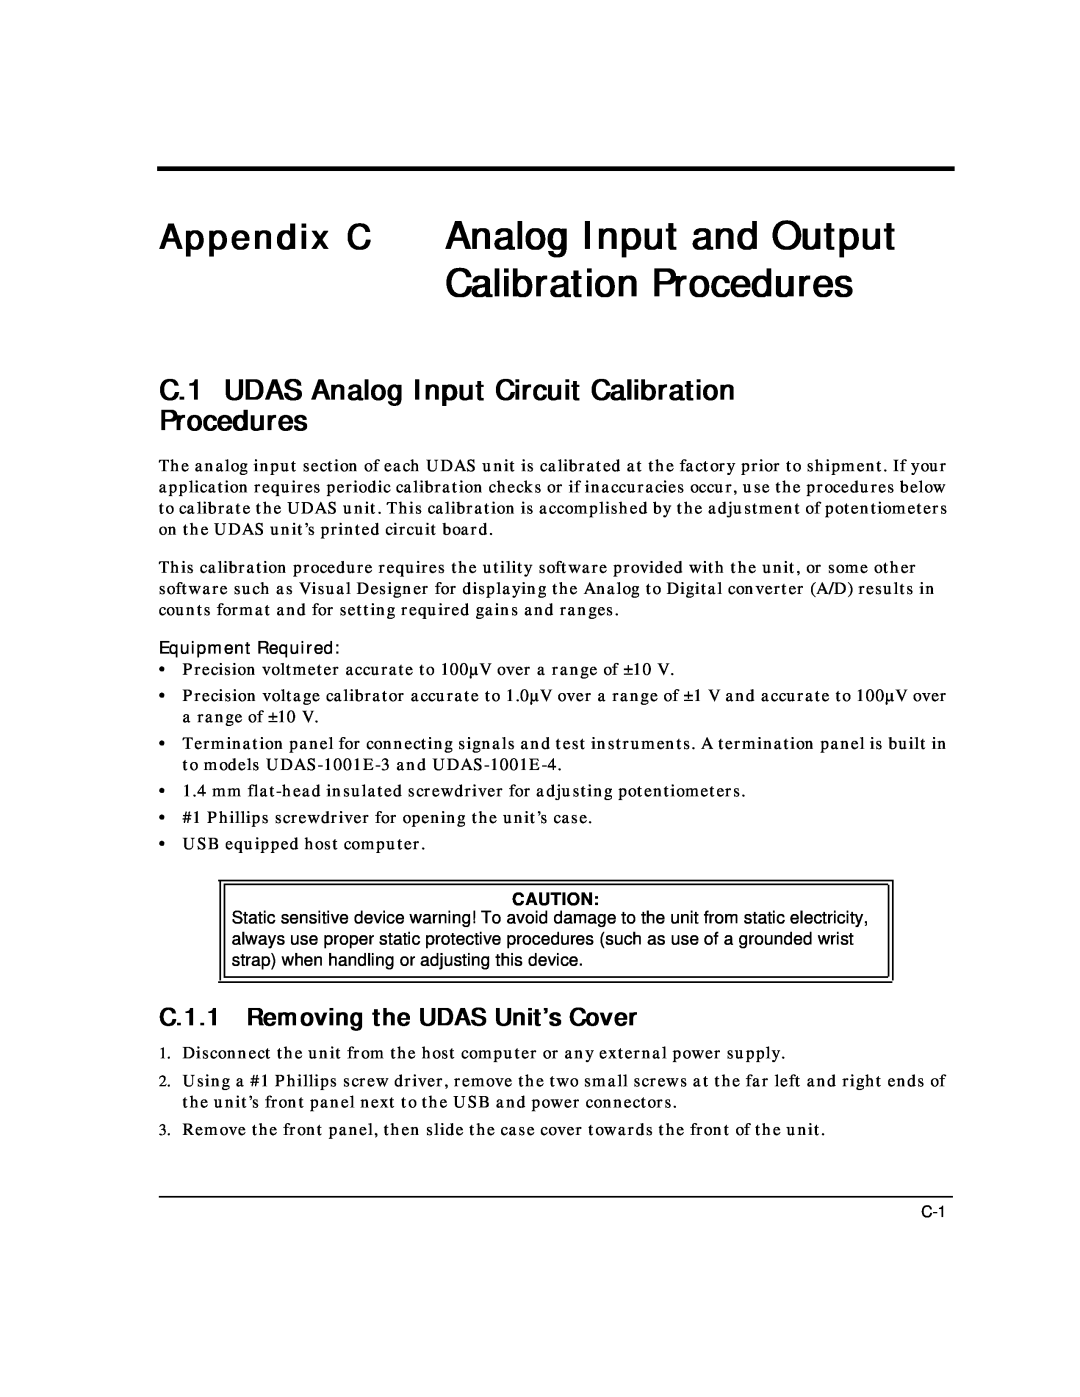 Intelligent Motion Systems UDAS-1001E Appendix C Analog Input and Output Calibration Procedures, Equipment Required 